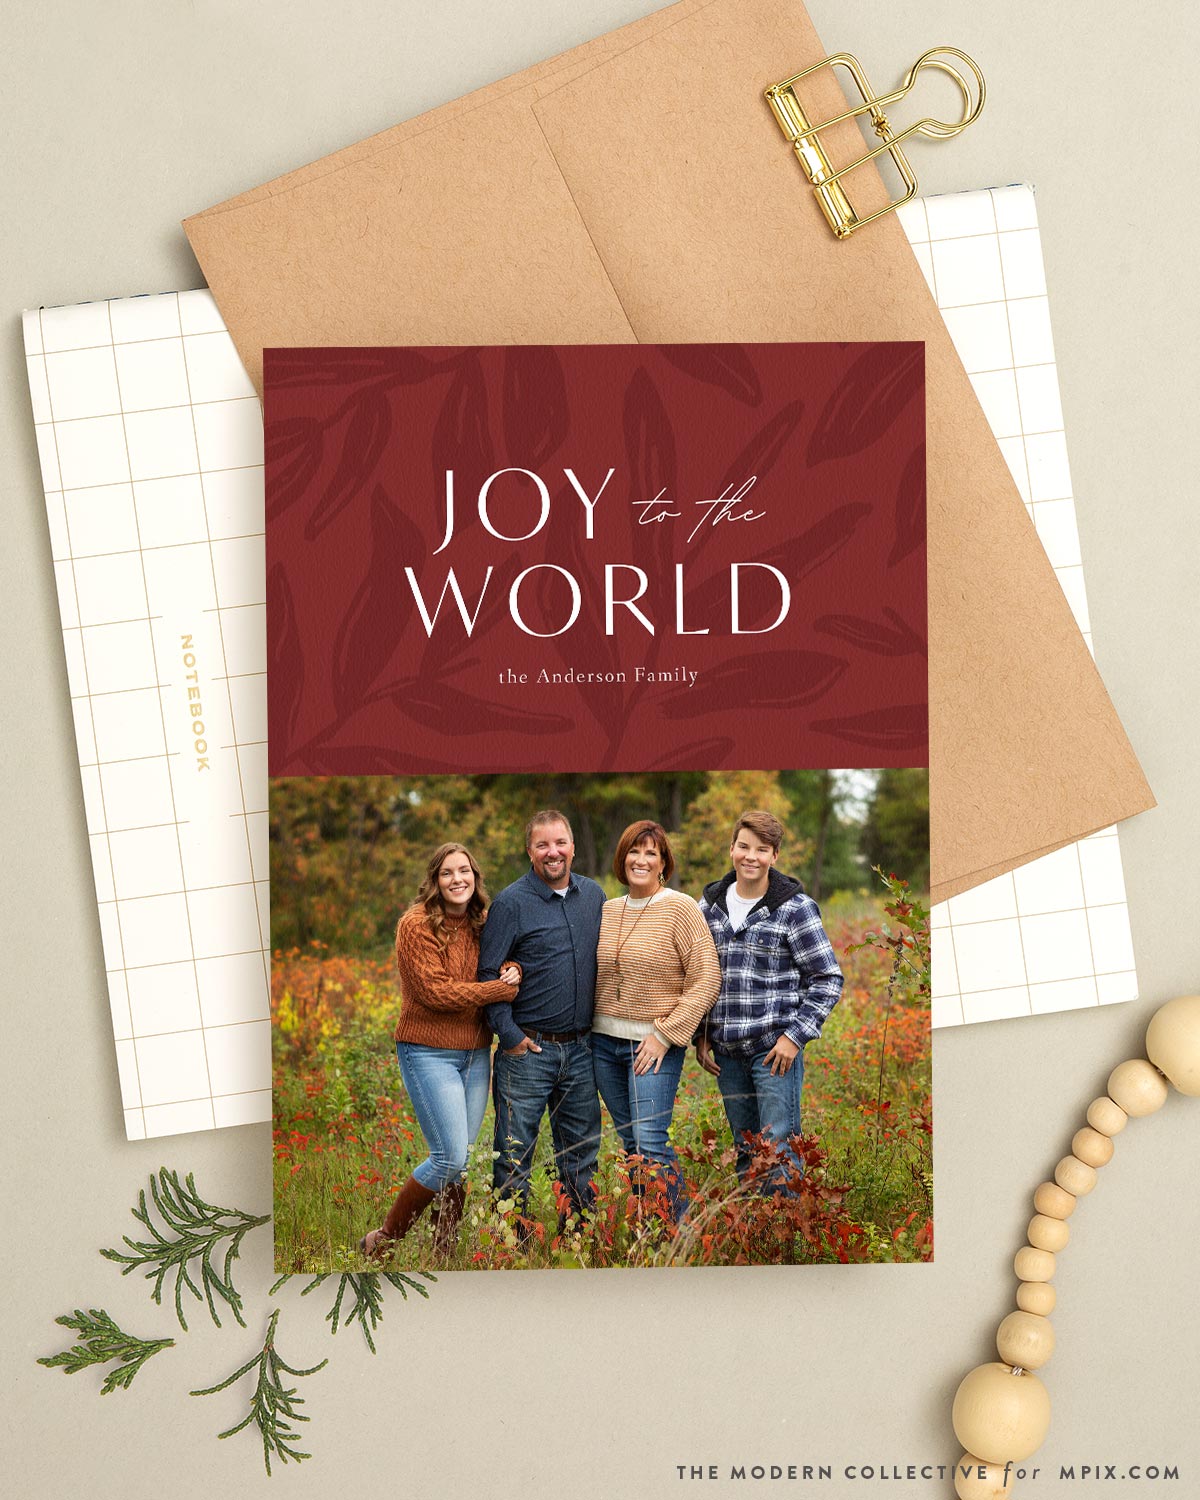 Joy to the World Photo Christmas Card in Red for Mpix.com designed by The Modern Collective